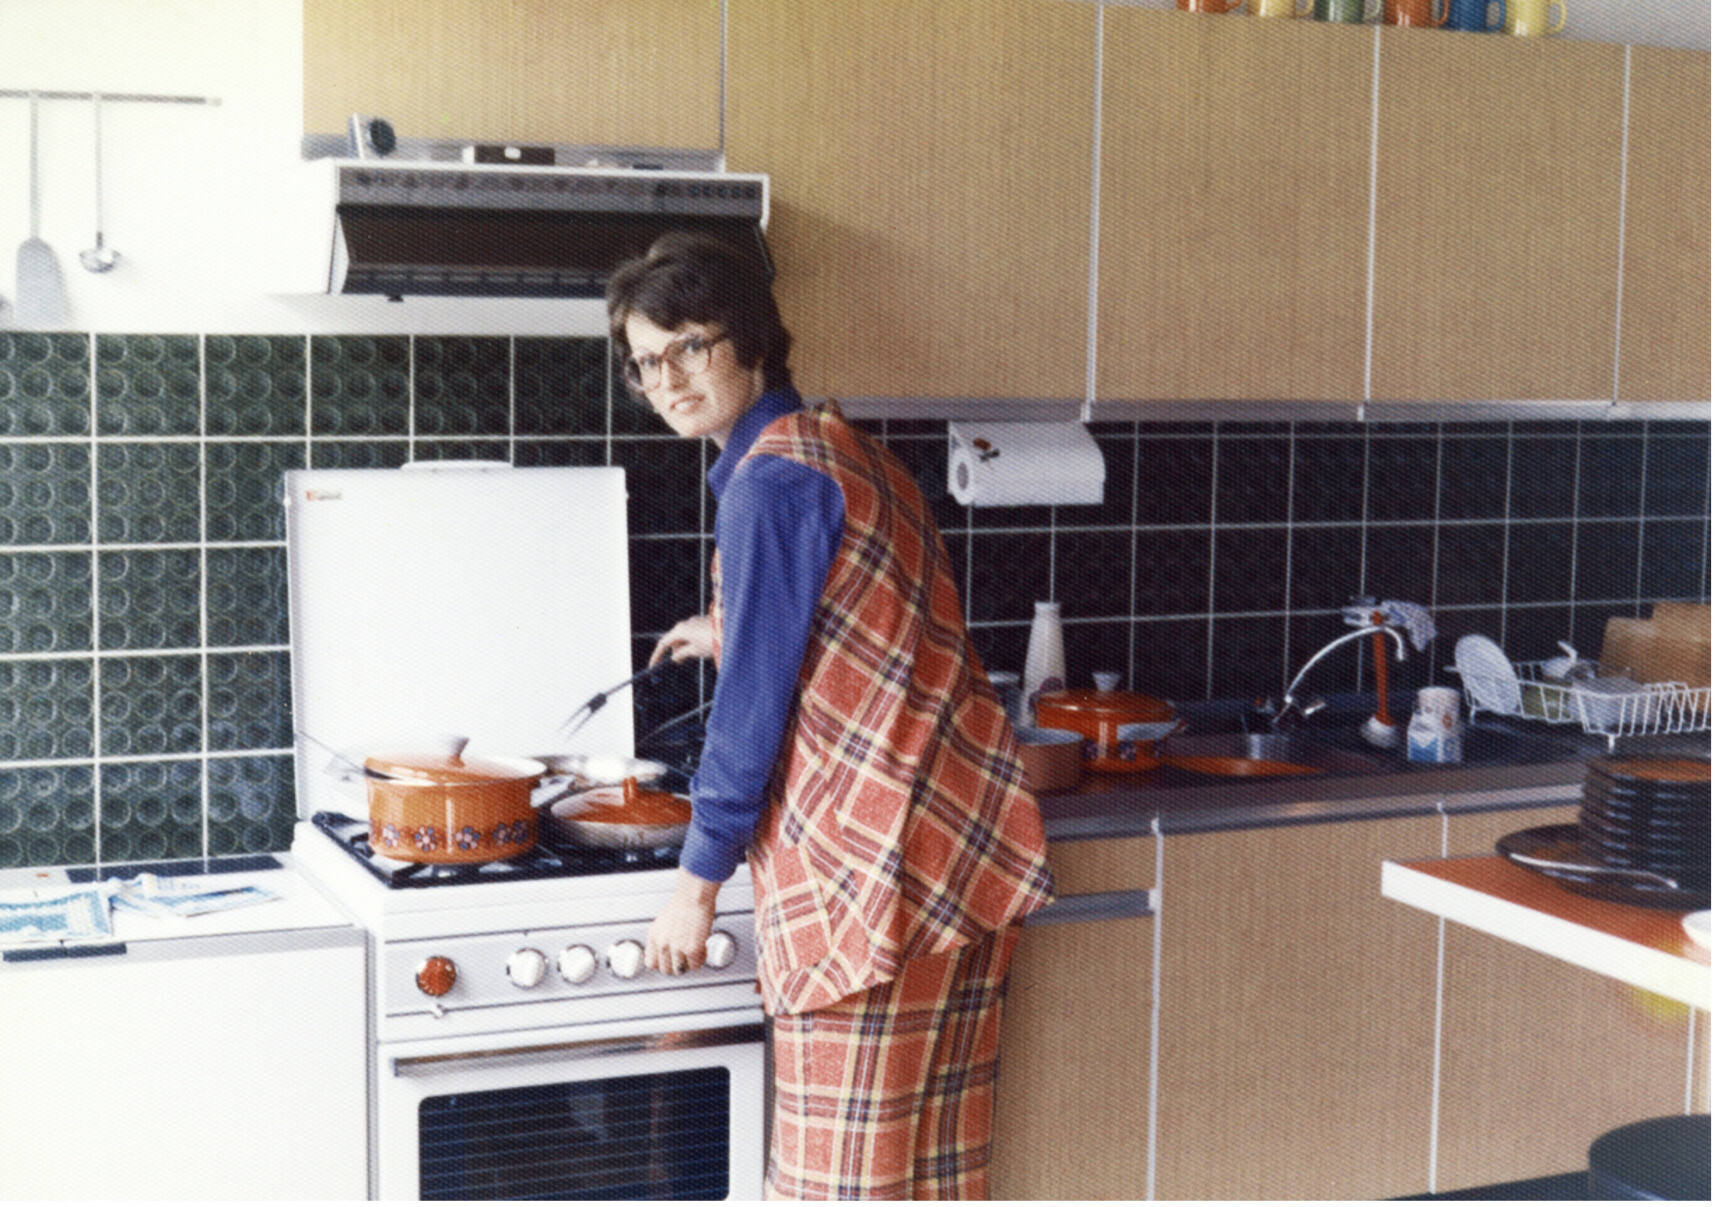 Housewife cooking at gas stove in early 1970's. Stock photo.